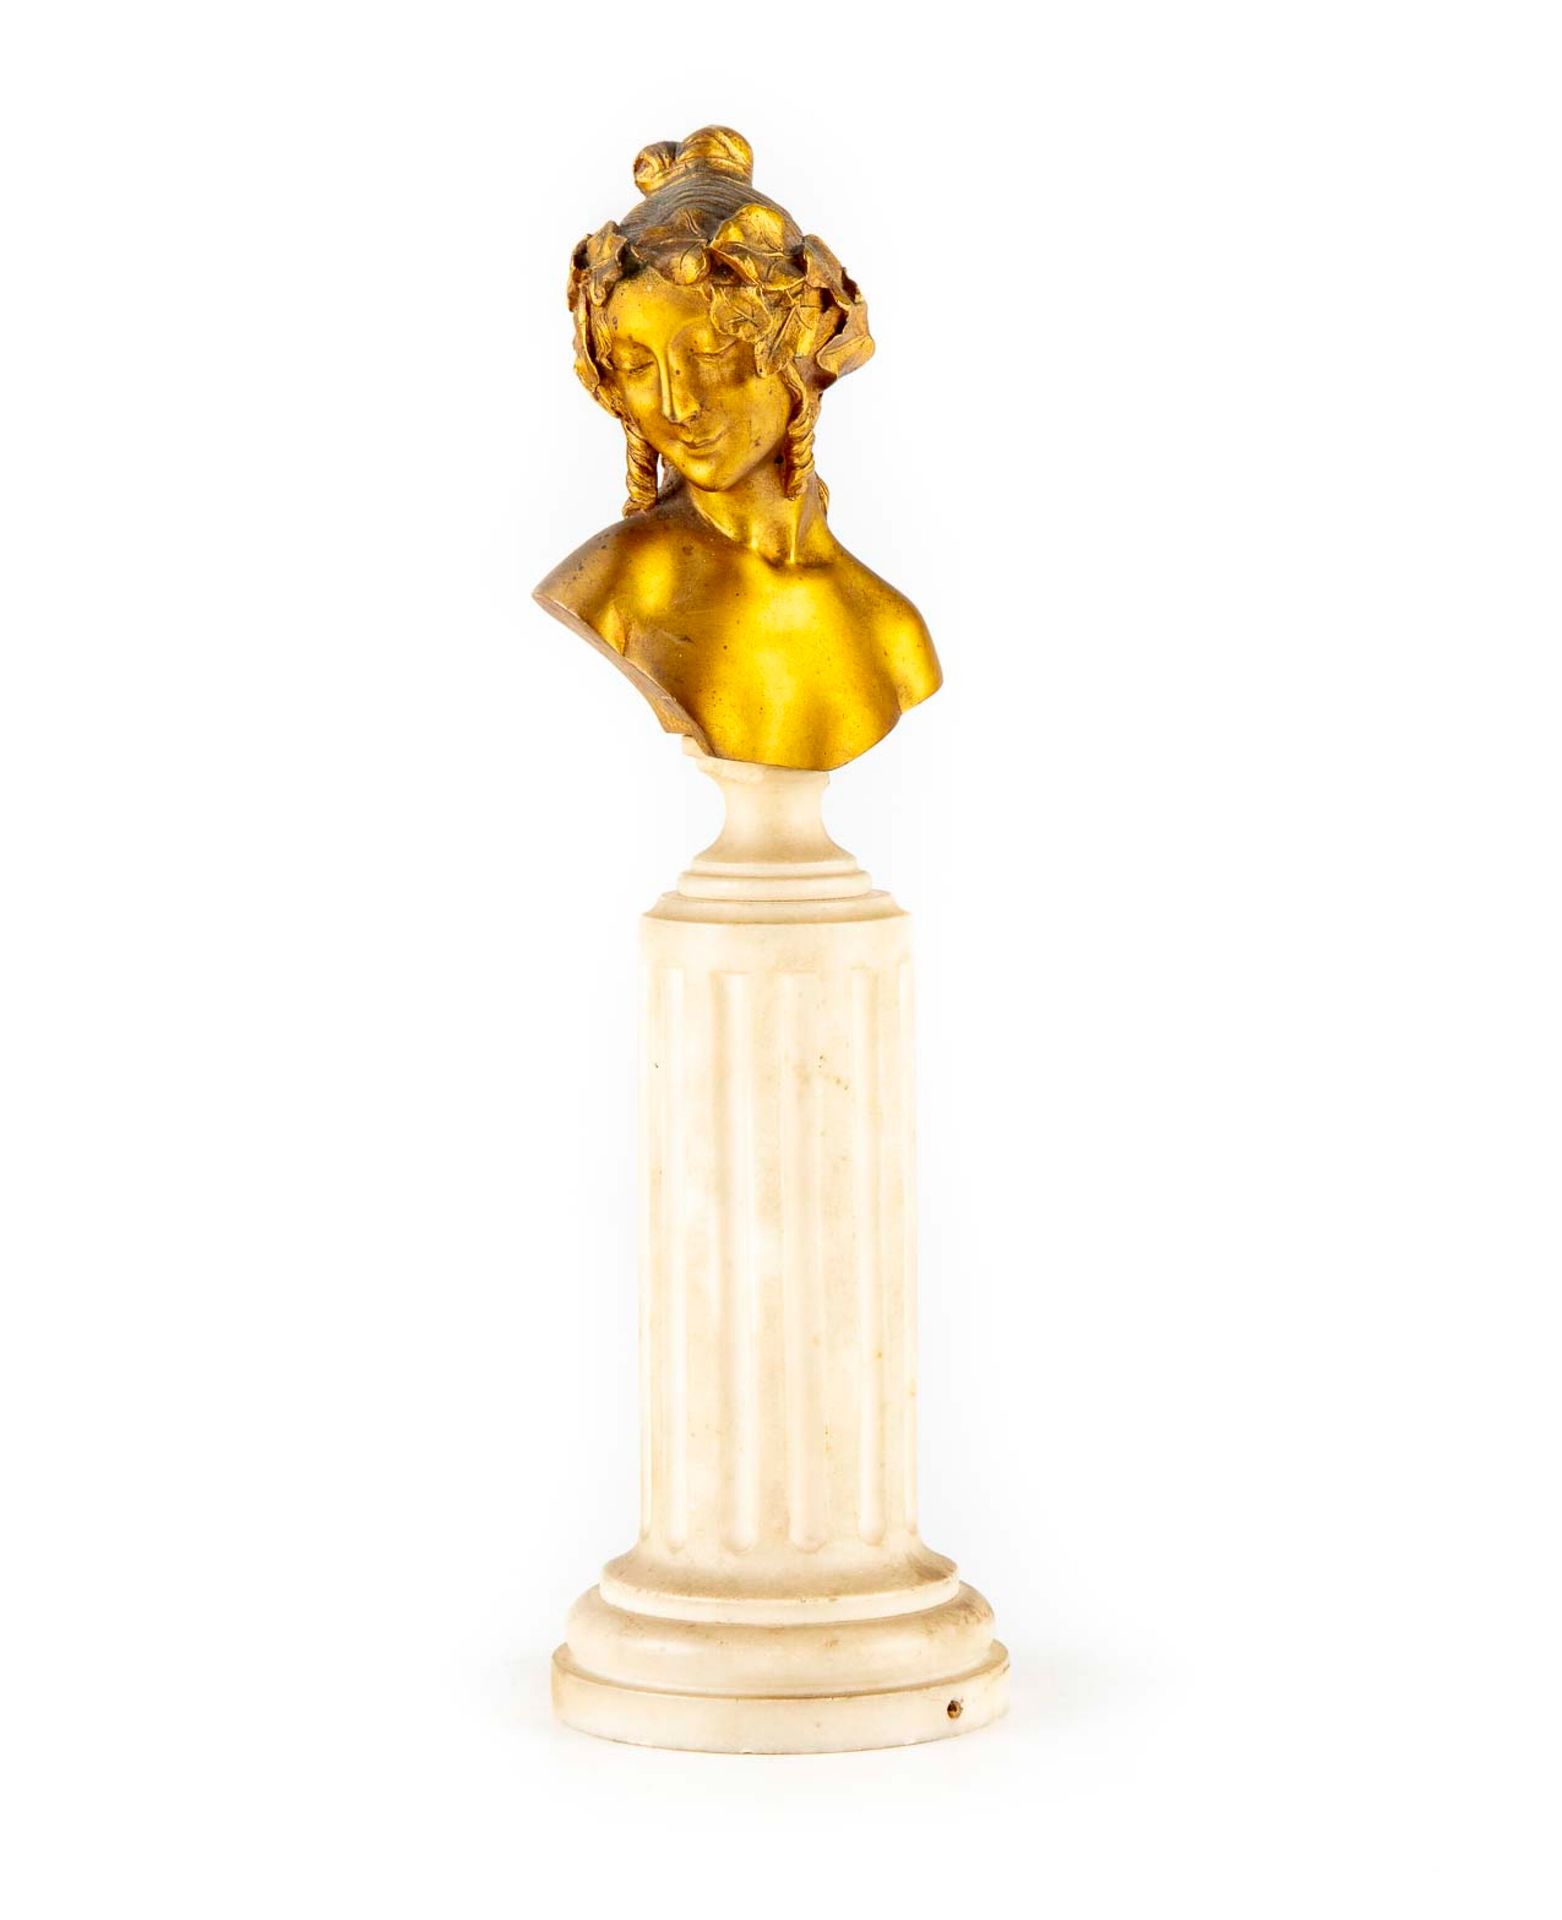 SOSSON Louis SOSSON

Gilded bronze bust of a woman mounted on a marble column

C&hellip;